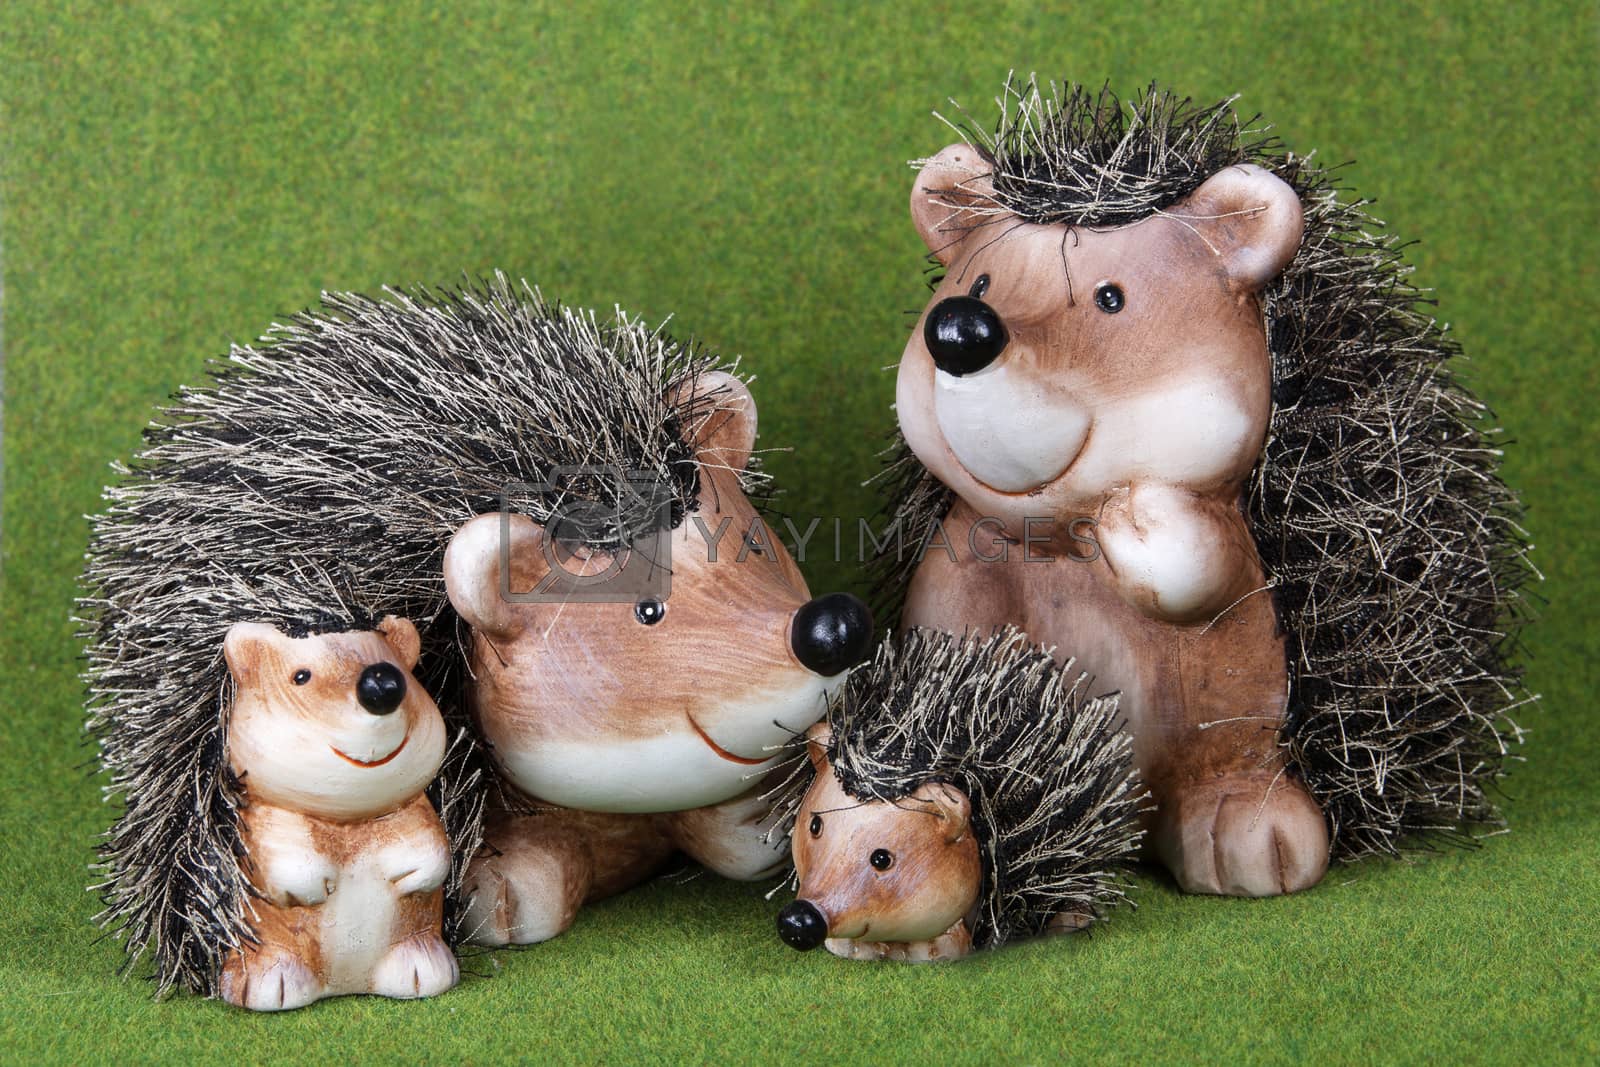 Royalty free image of Family of cute toy Hedgehogs together on grass by VivacityImages